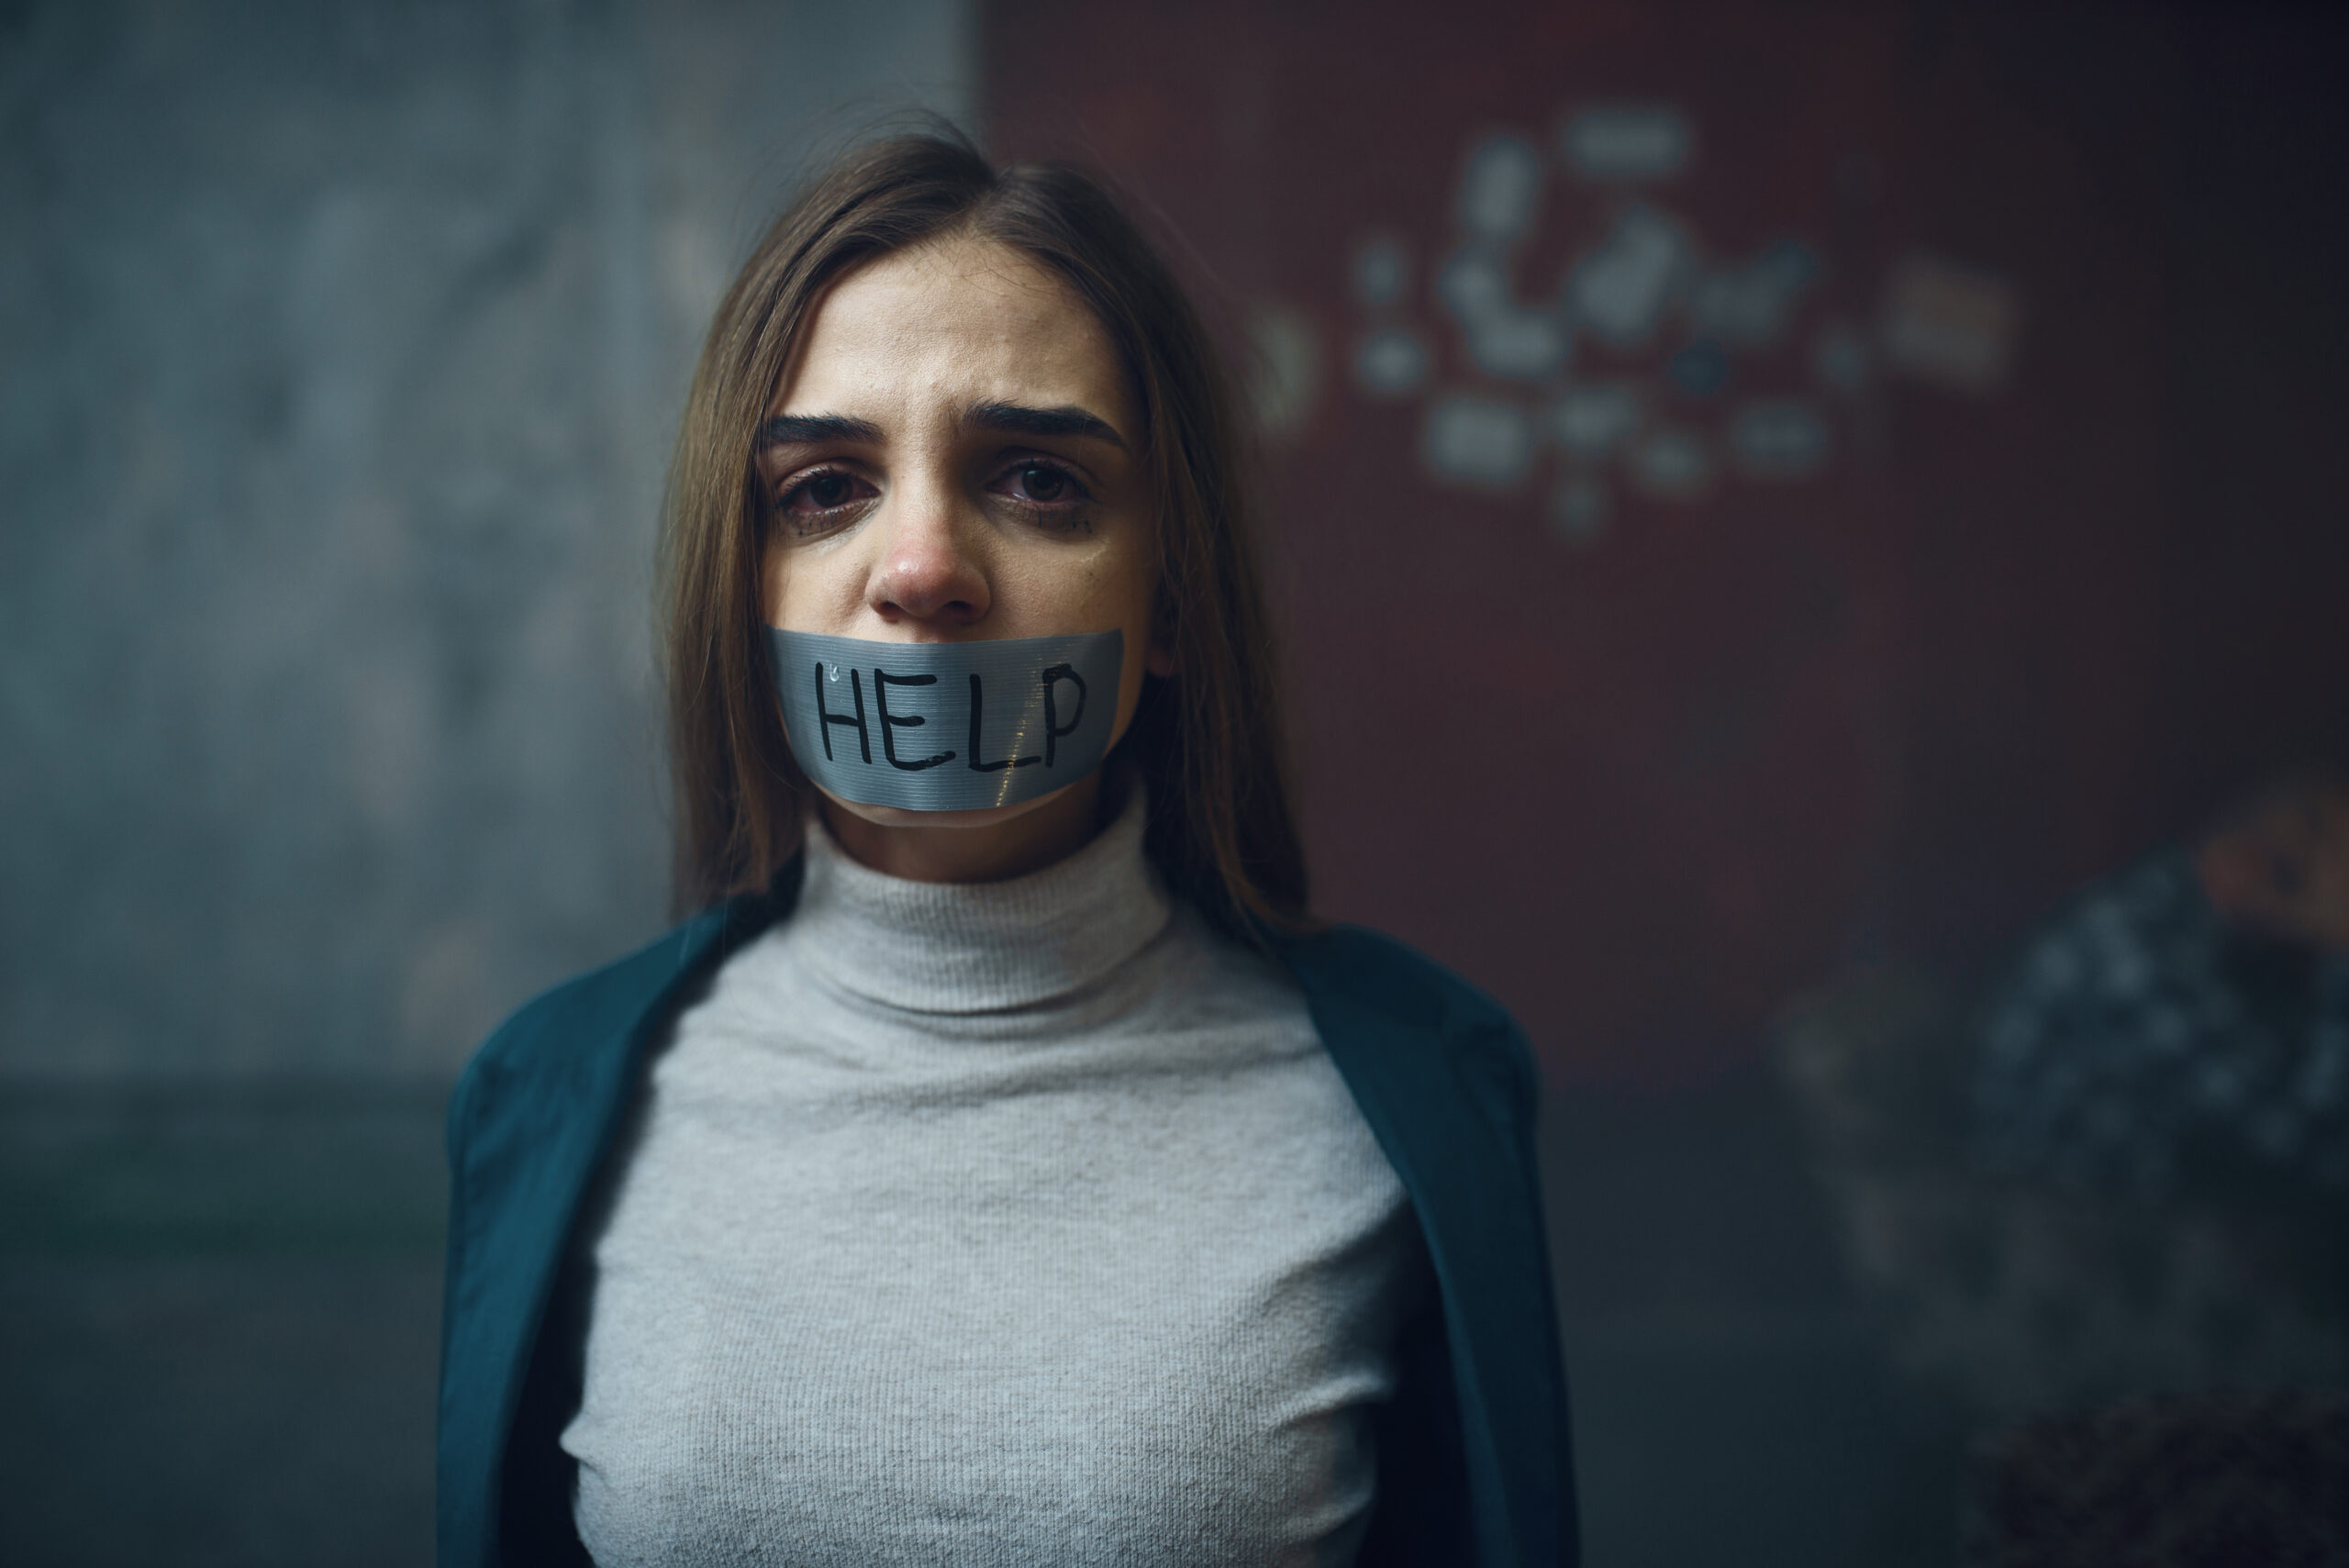 Female victim of maniac kidnapper with her mouth taped shut. Kidnapping is a serious crime, kidnap horror, violence. Kidnapping lawyer should be contacted. 